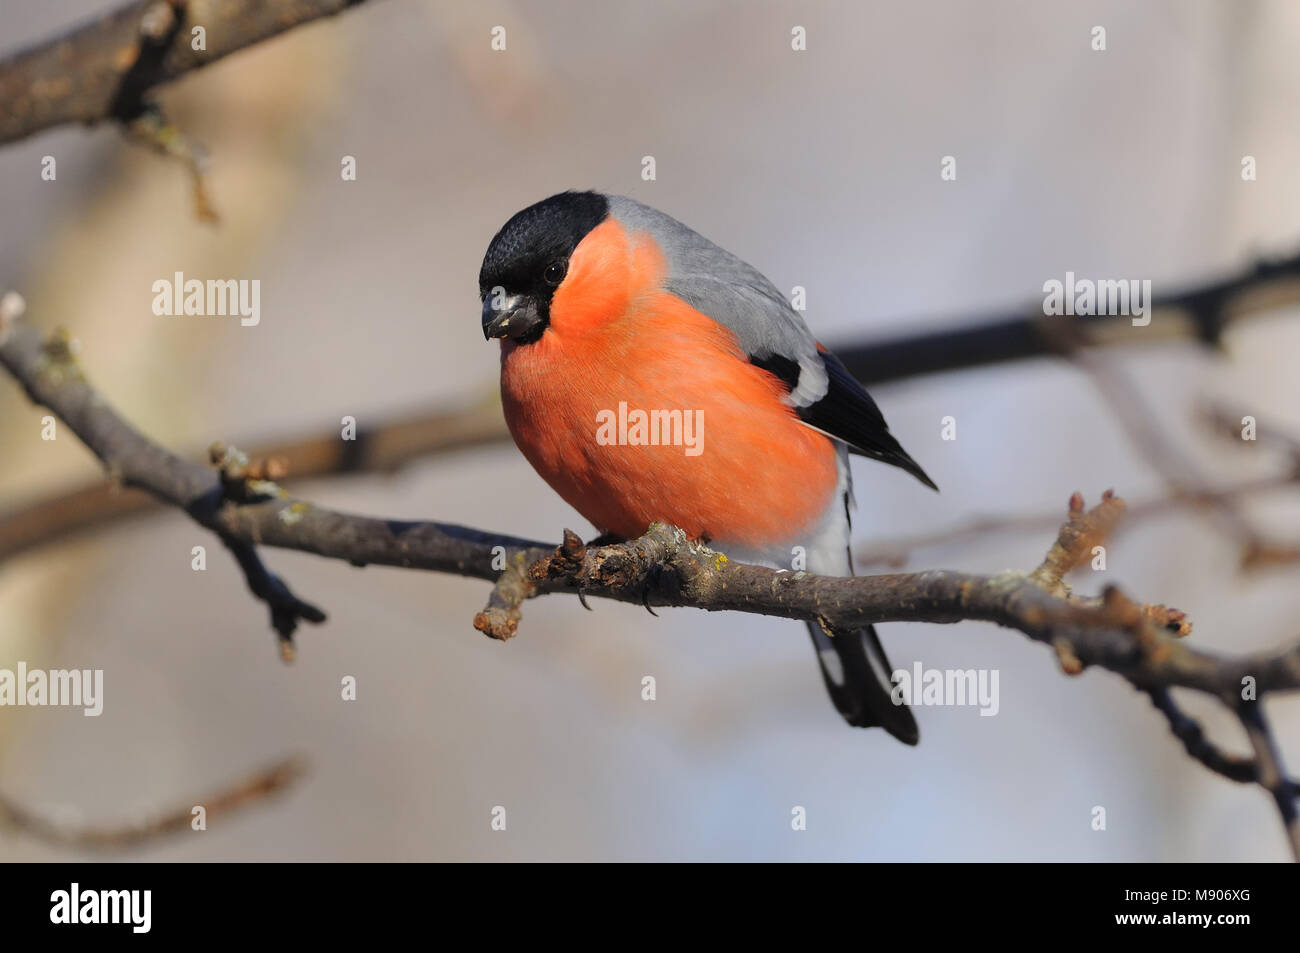 Eurasian (common) bullfinch (Pyrrhula pyrrhula) looks from a branch of wild apples to the ground (where sunflower seeds lie). Stock Photo